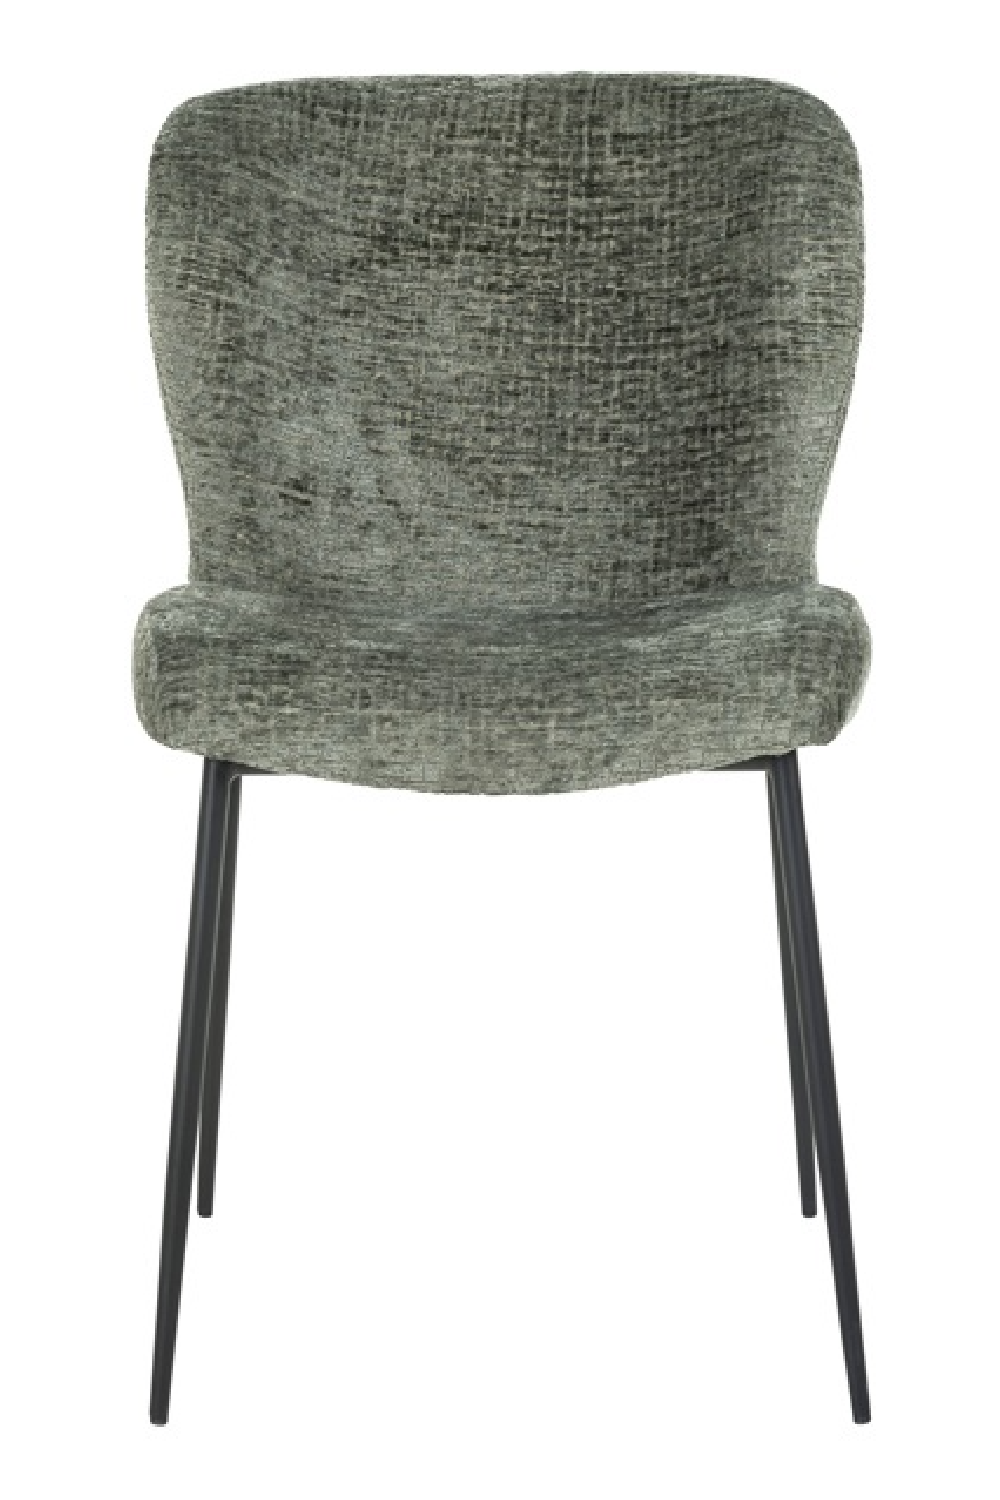 Upholstered Minimalist Dining Chair | OROA Darby | Oroa.com